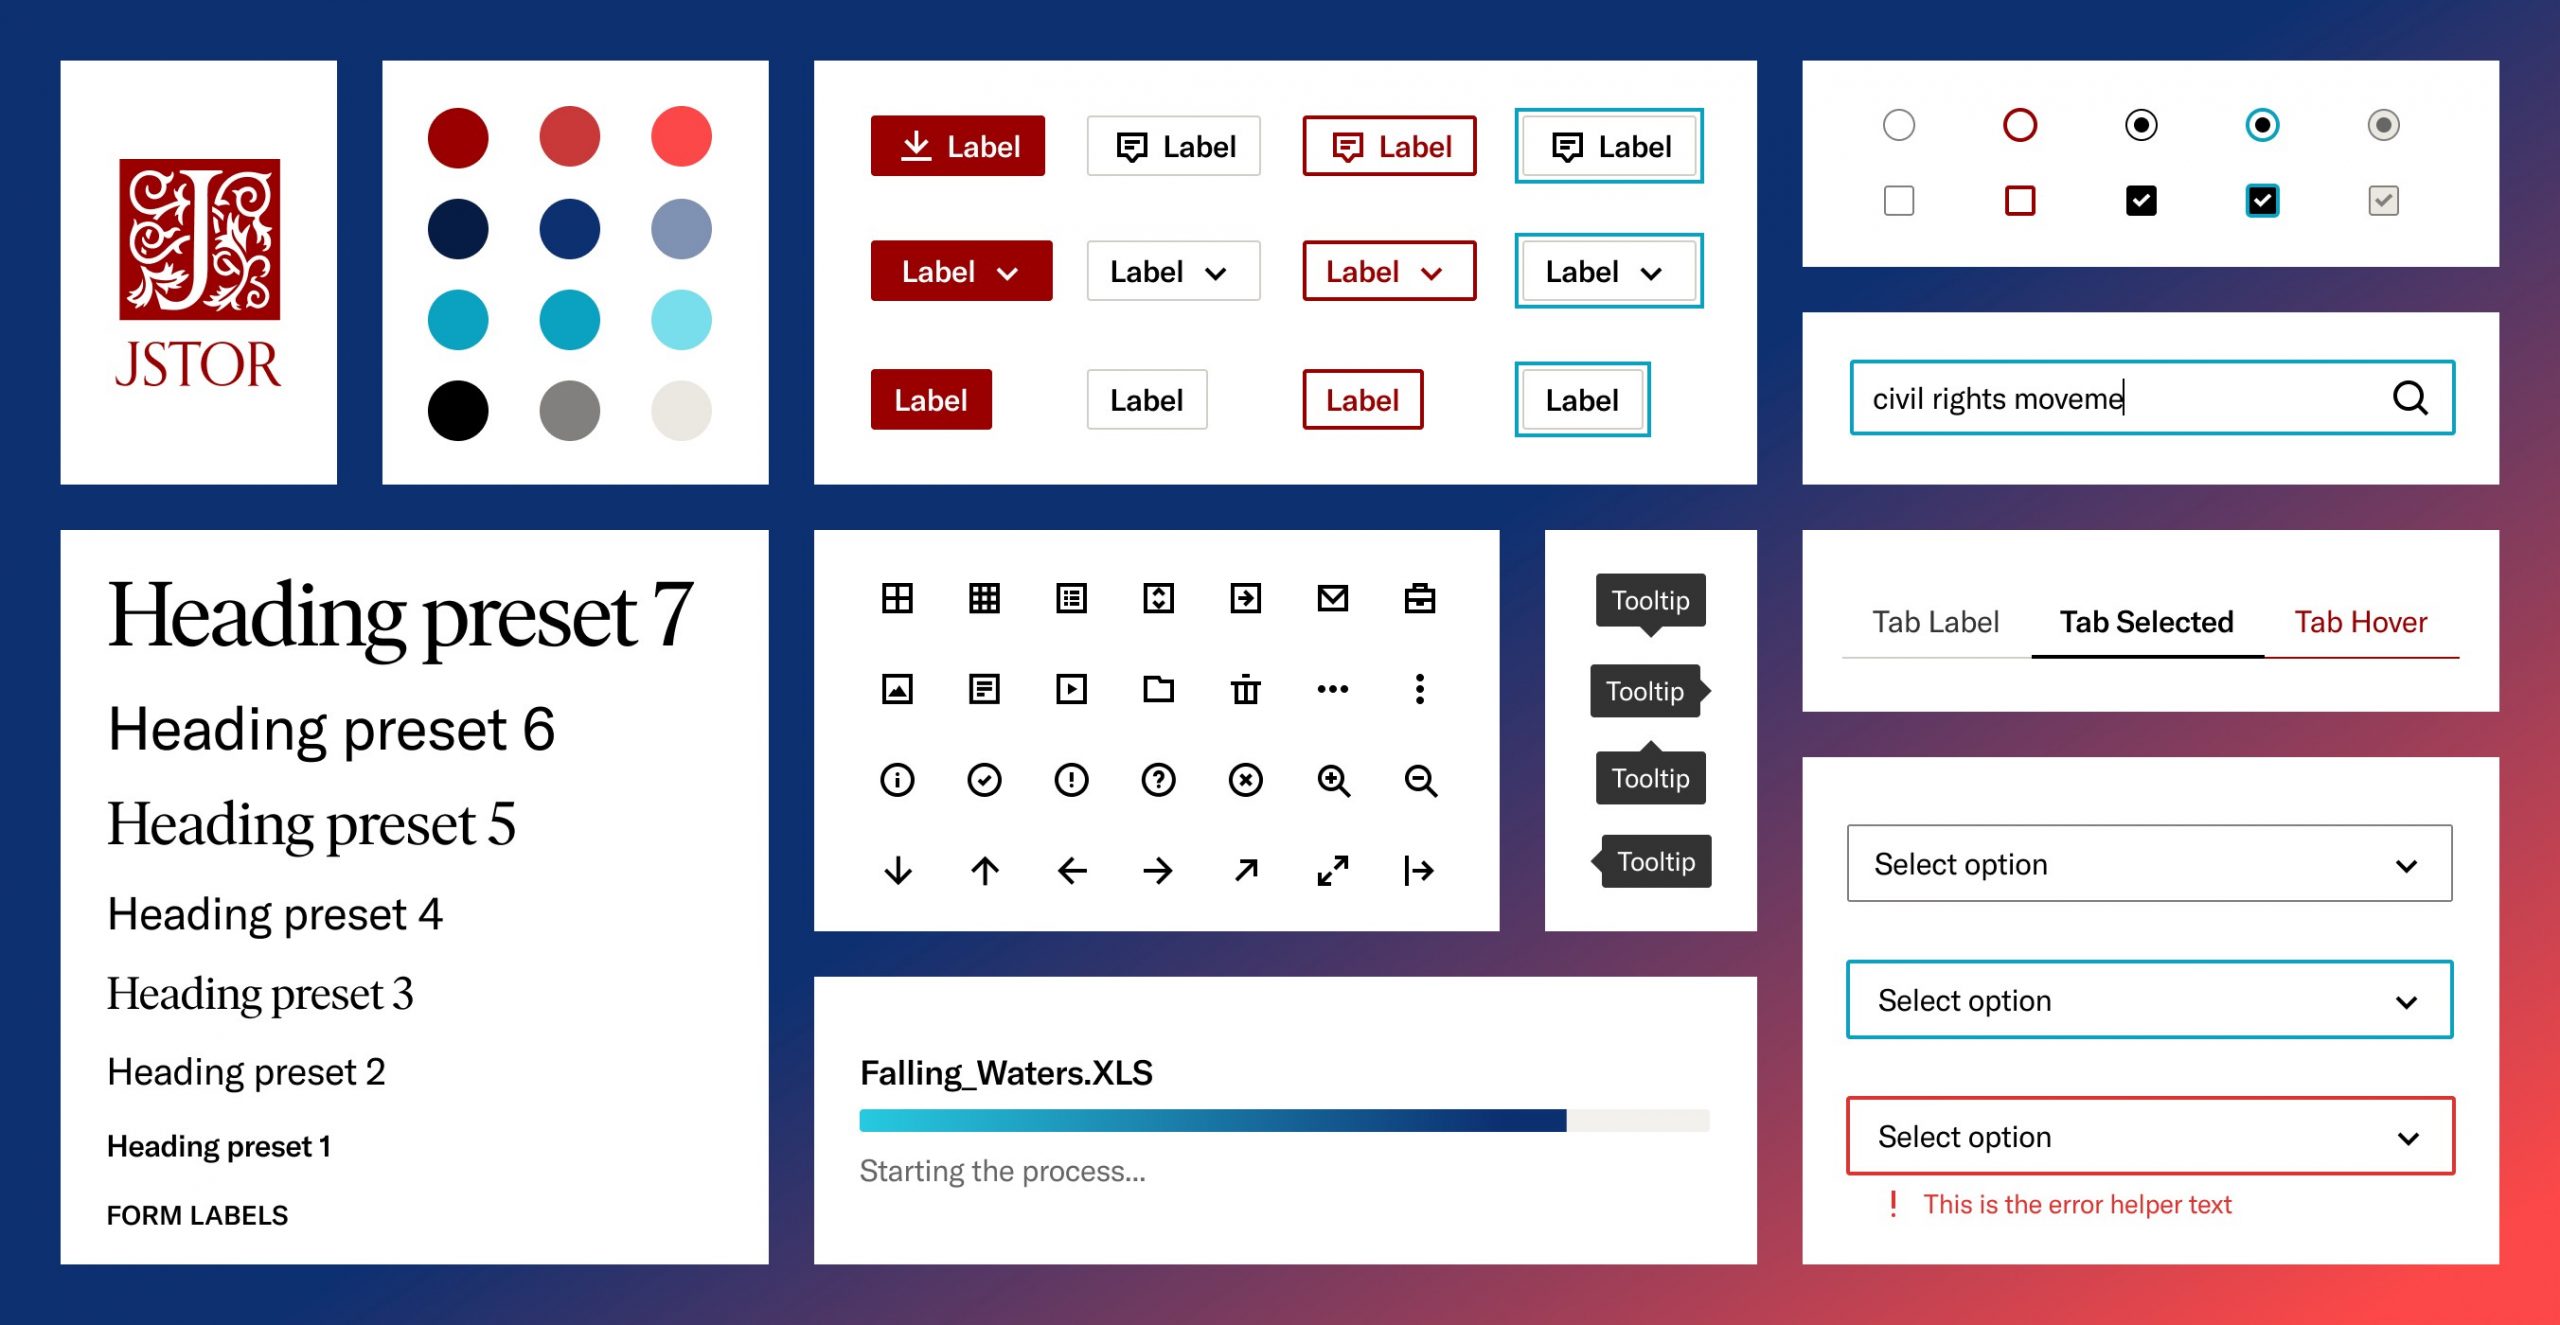 Selection from the Pharos design system interface